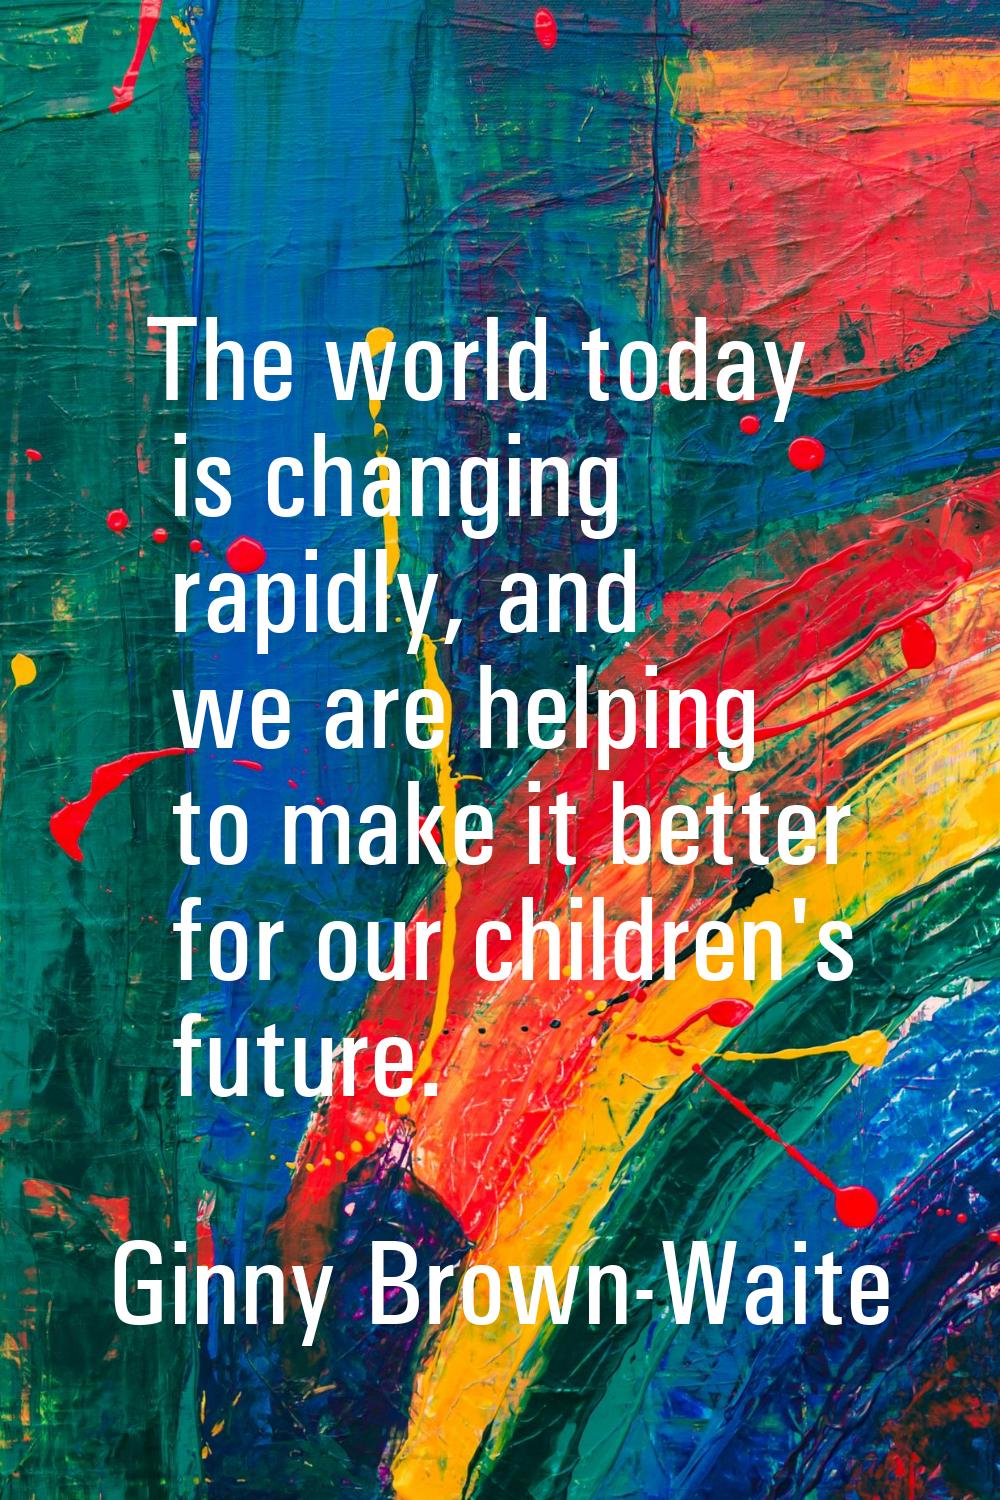 The world today is changing rapidly, and we are helping to make it better for our children's future